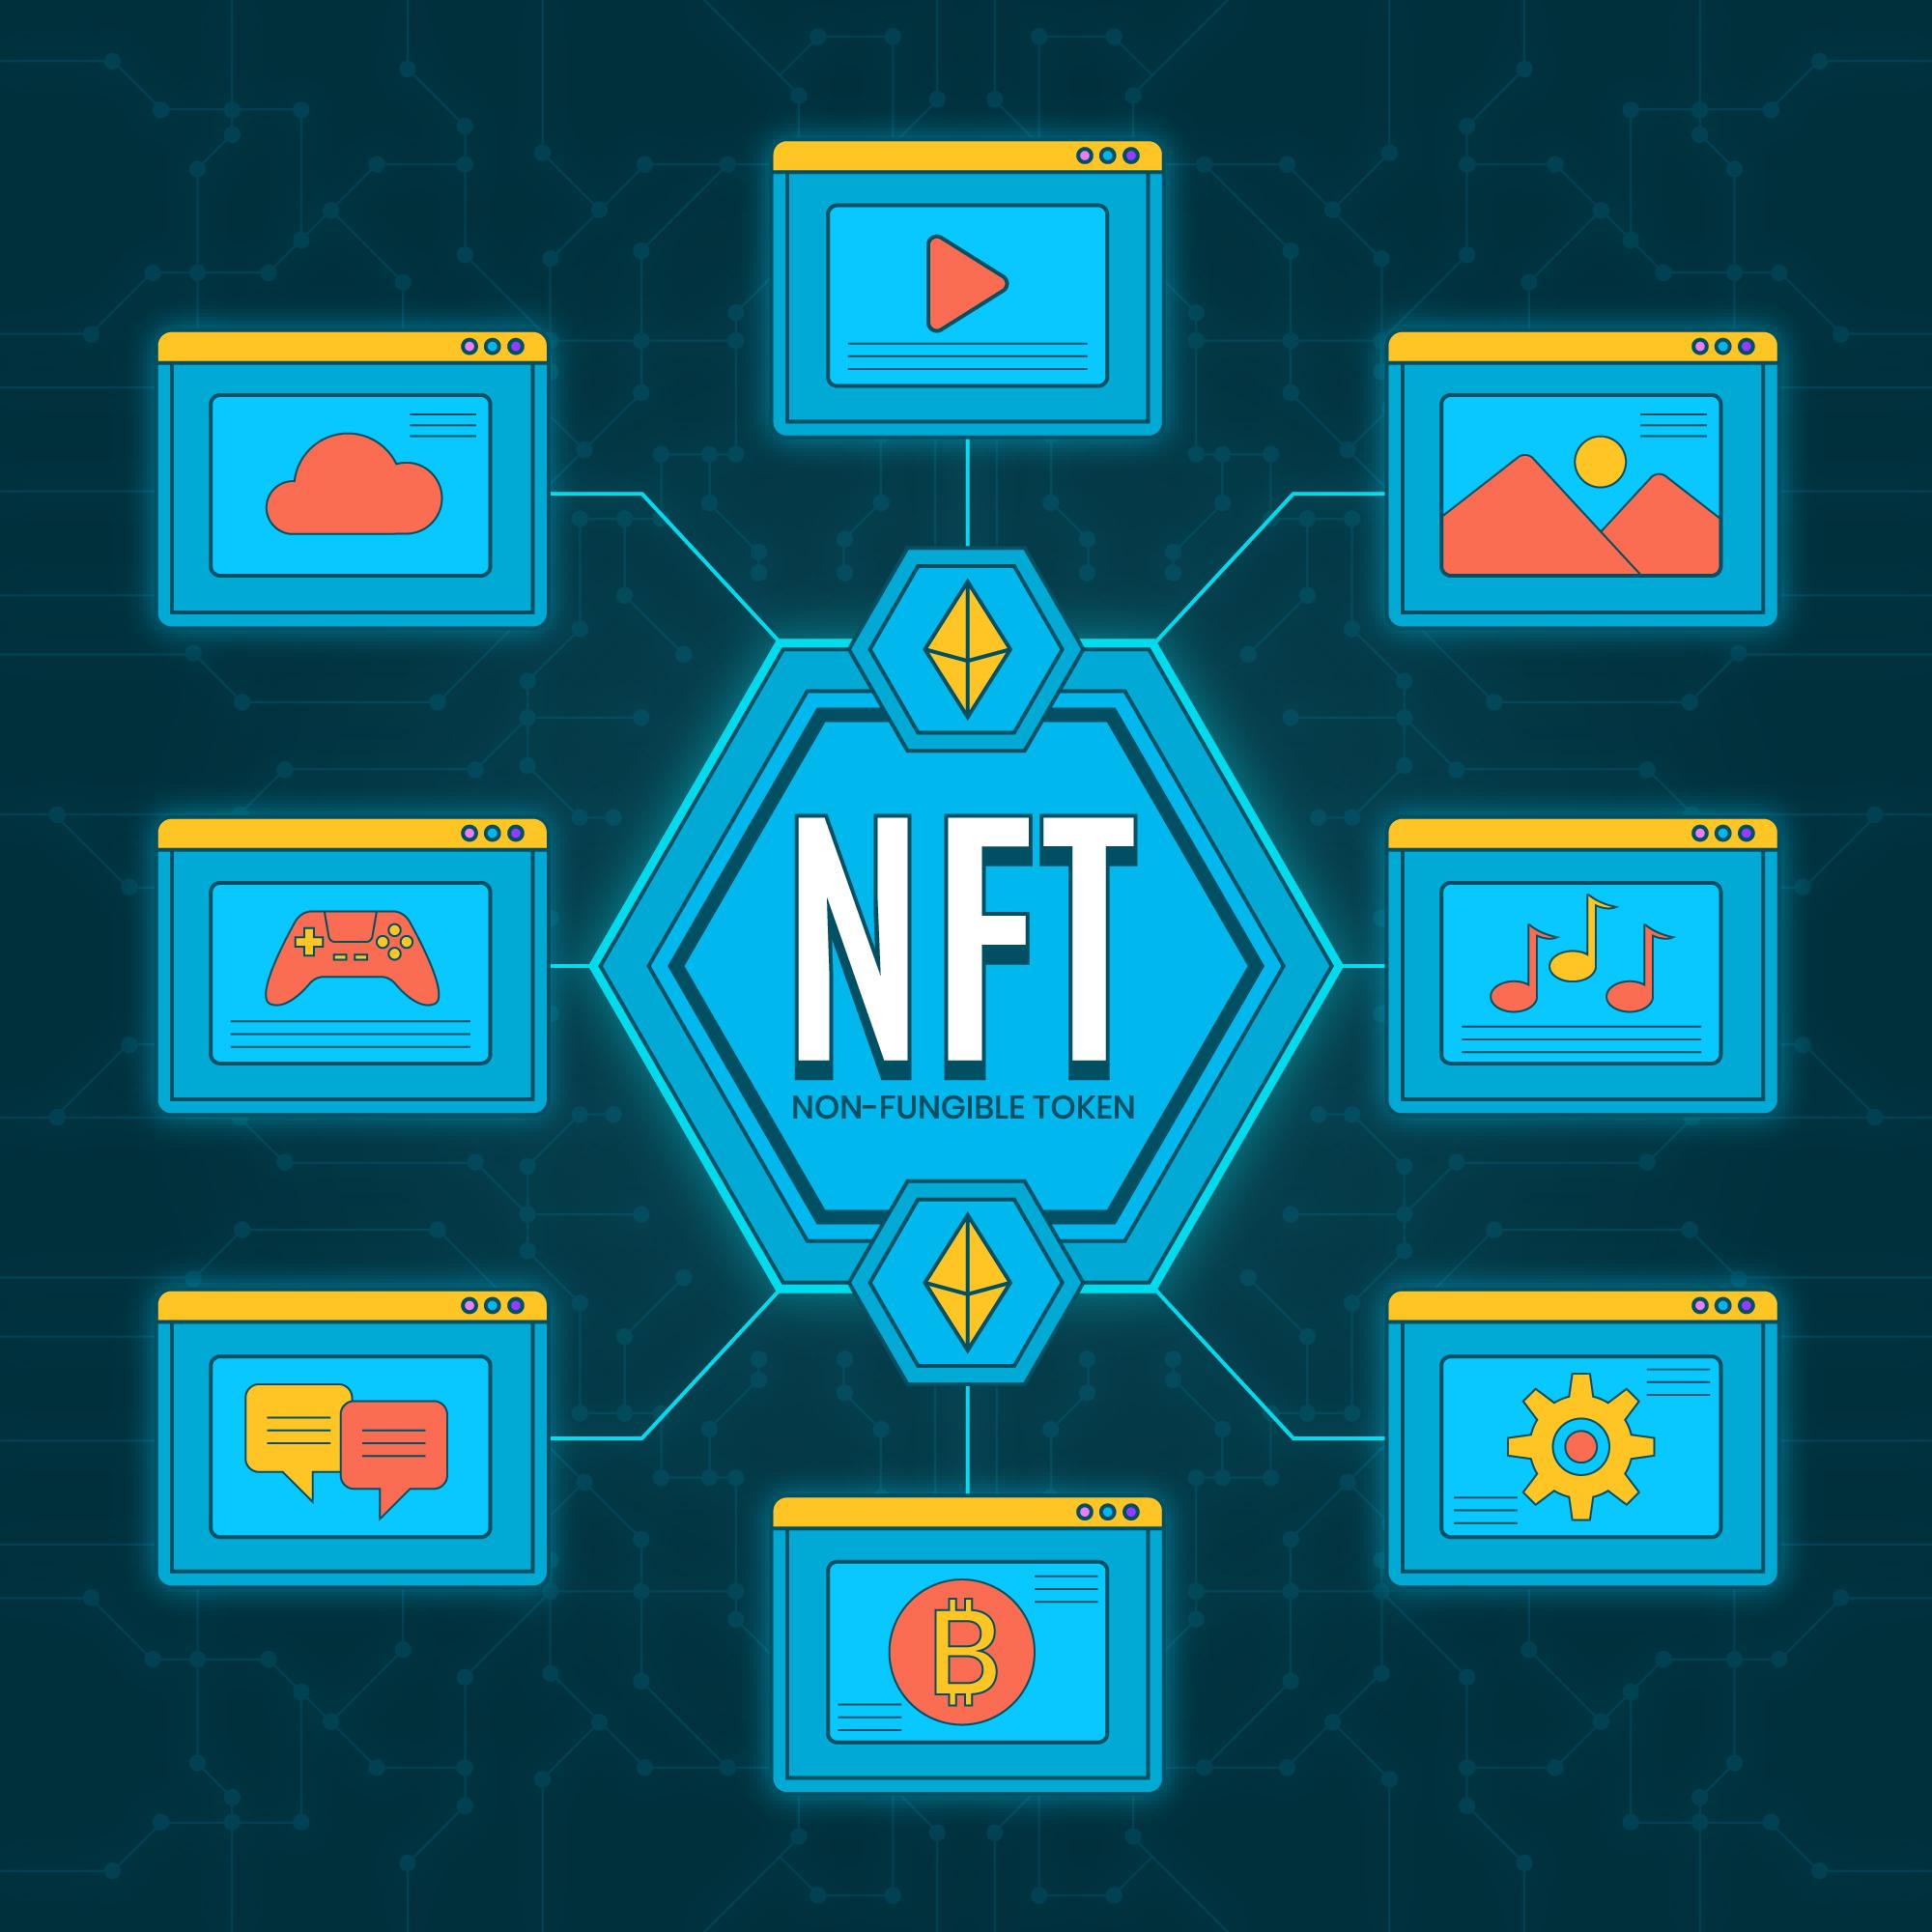 Buying & Selling All Kinds of Digital Assets on NFT Marketplaces